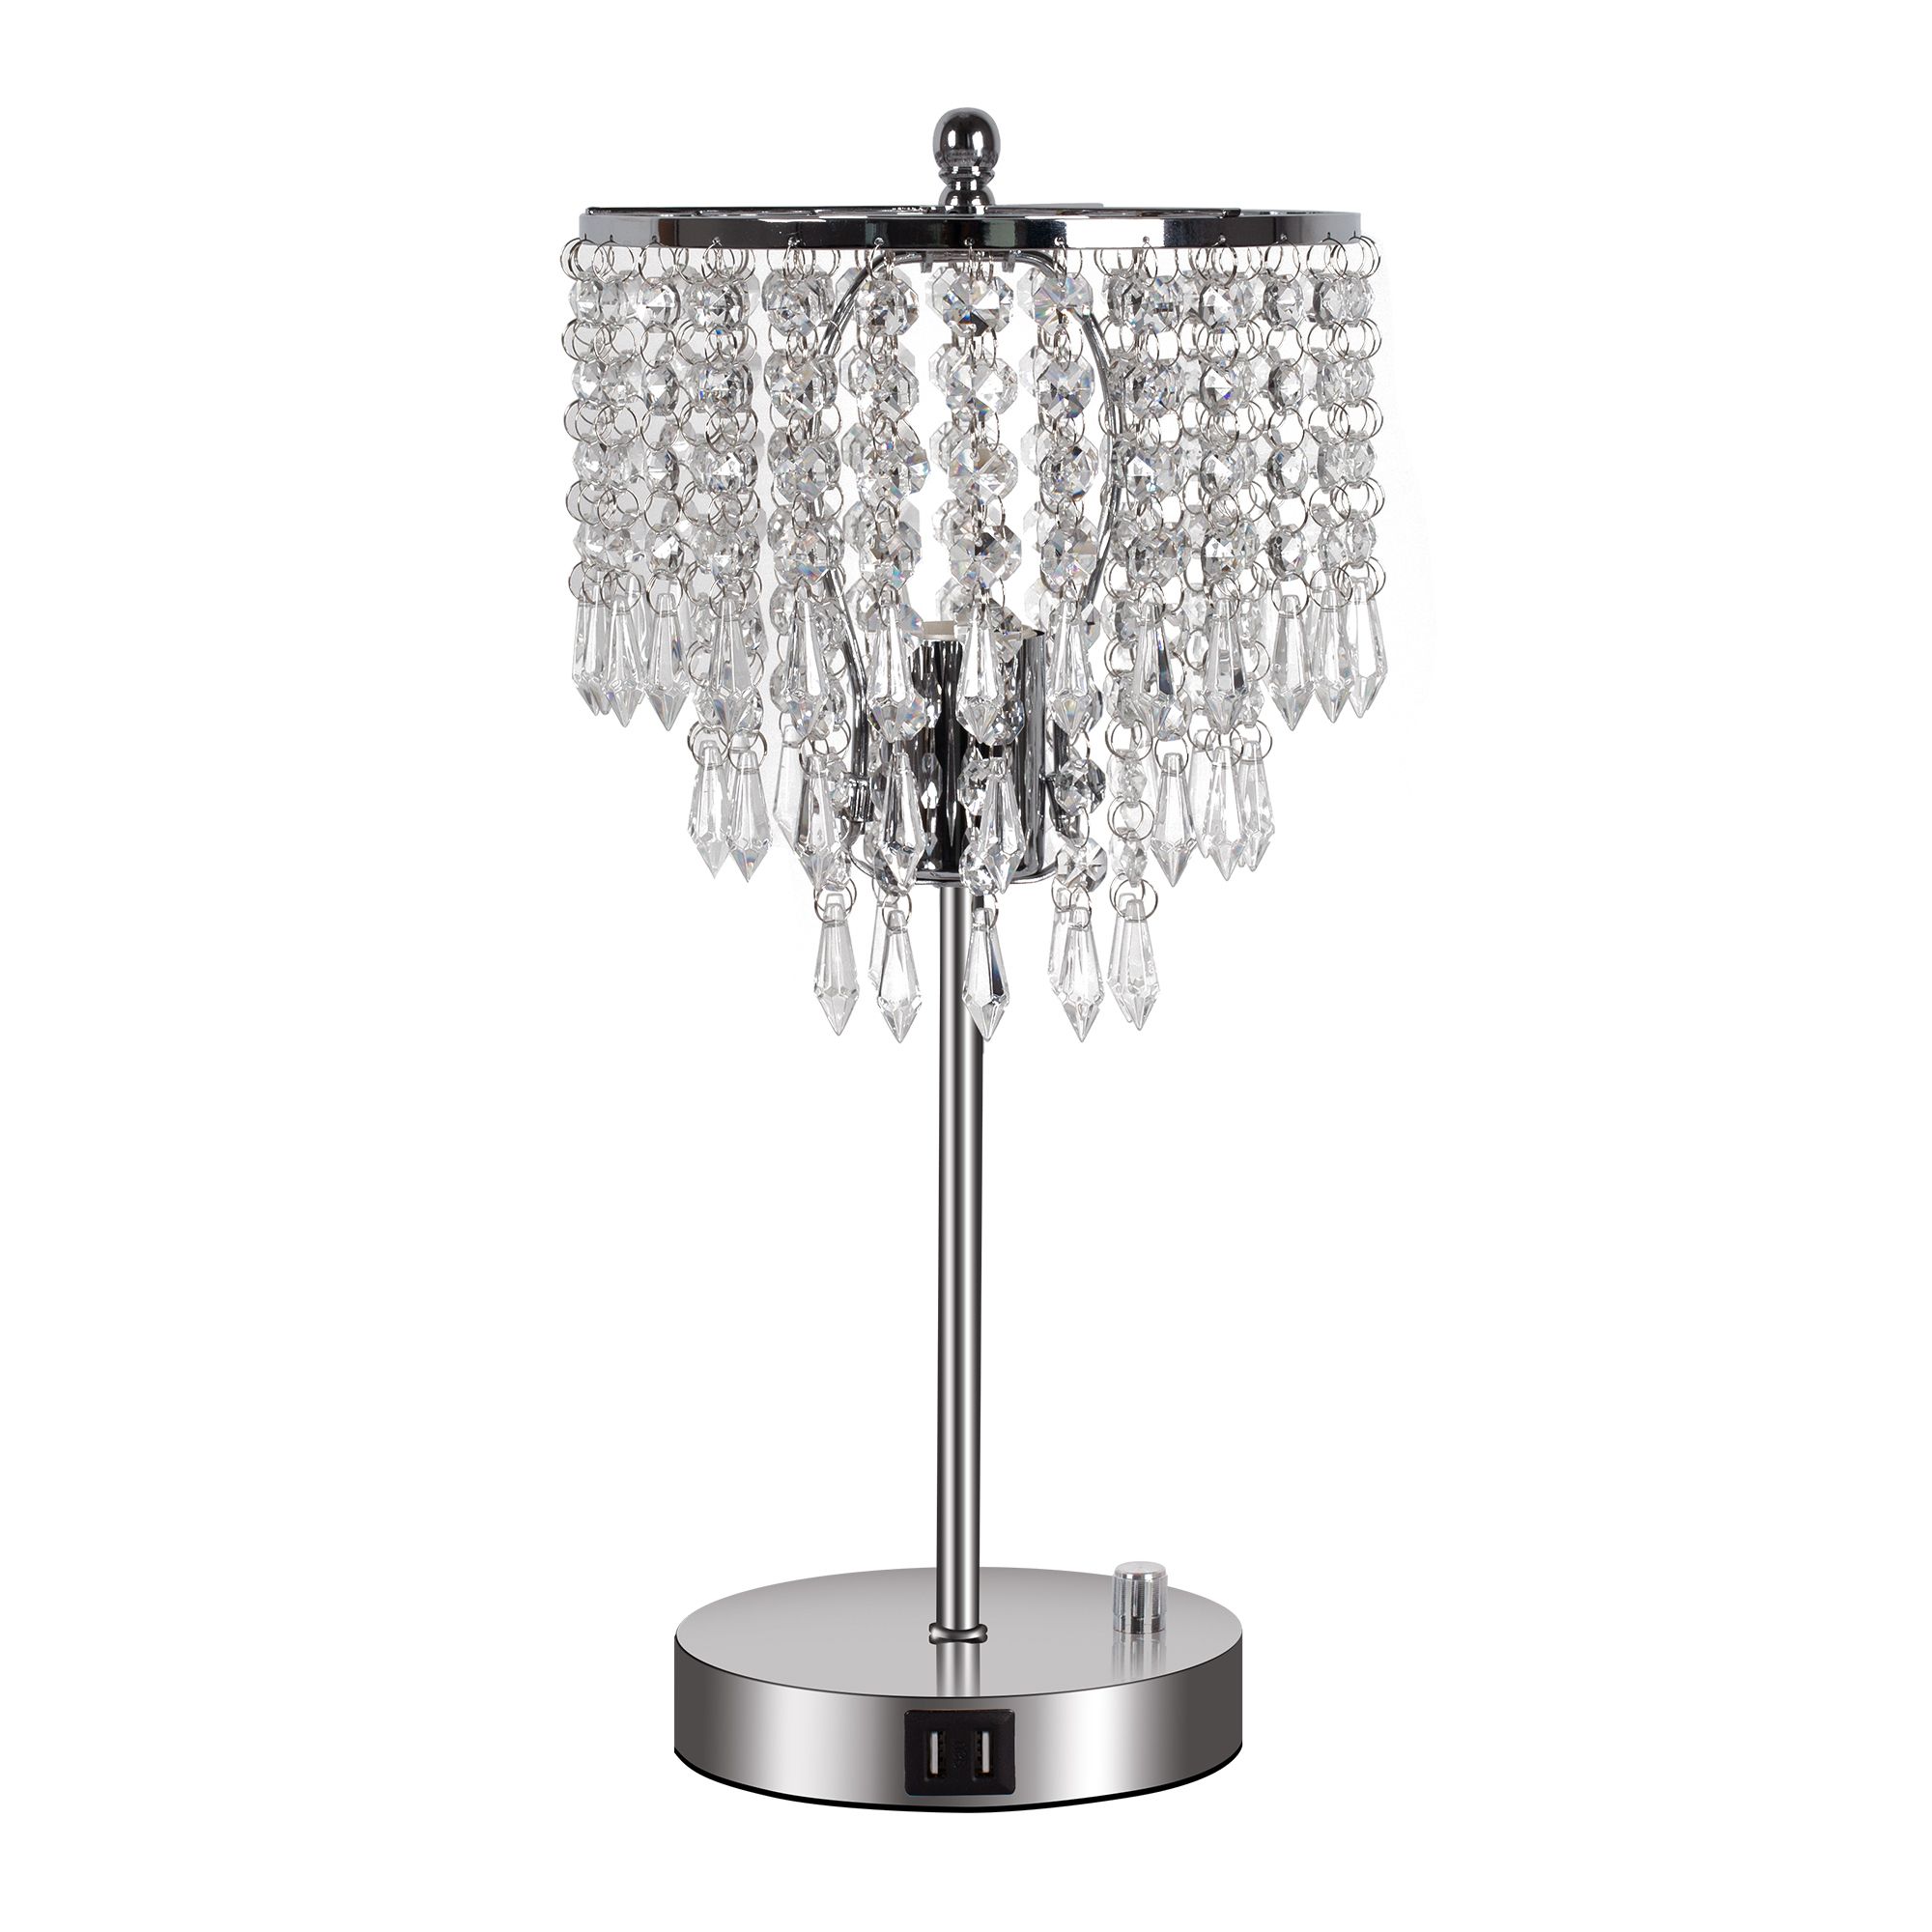 Lohas Dual Usb Port Crystal Table Lamp,k9 Crystal Beads Desk Lamp With  Dimming Button,great For Bedroom Living Room – Walmart Inside Crystal Bead Chandelier Floor Lamps (View 11 of 20)